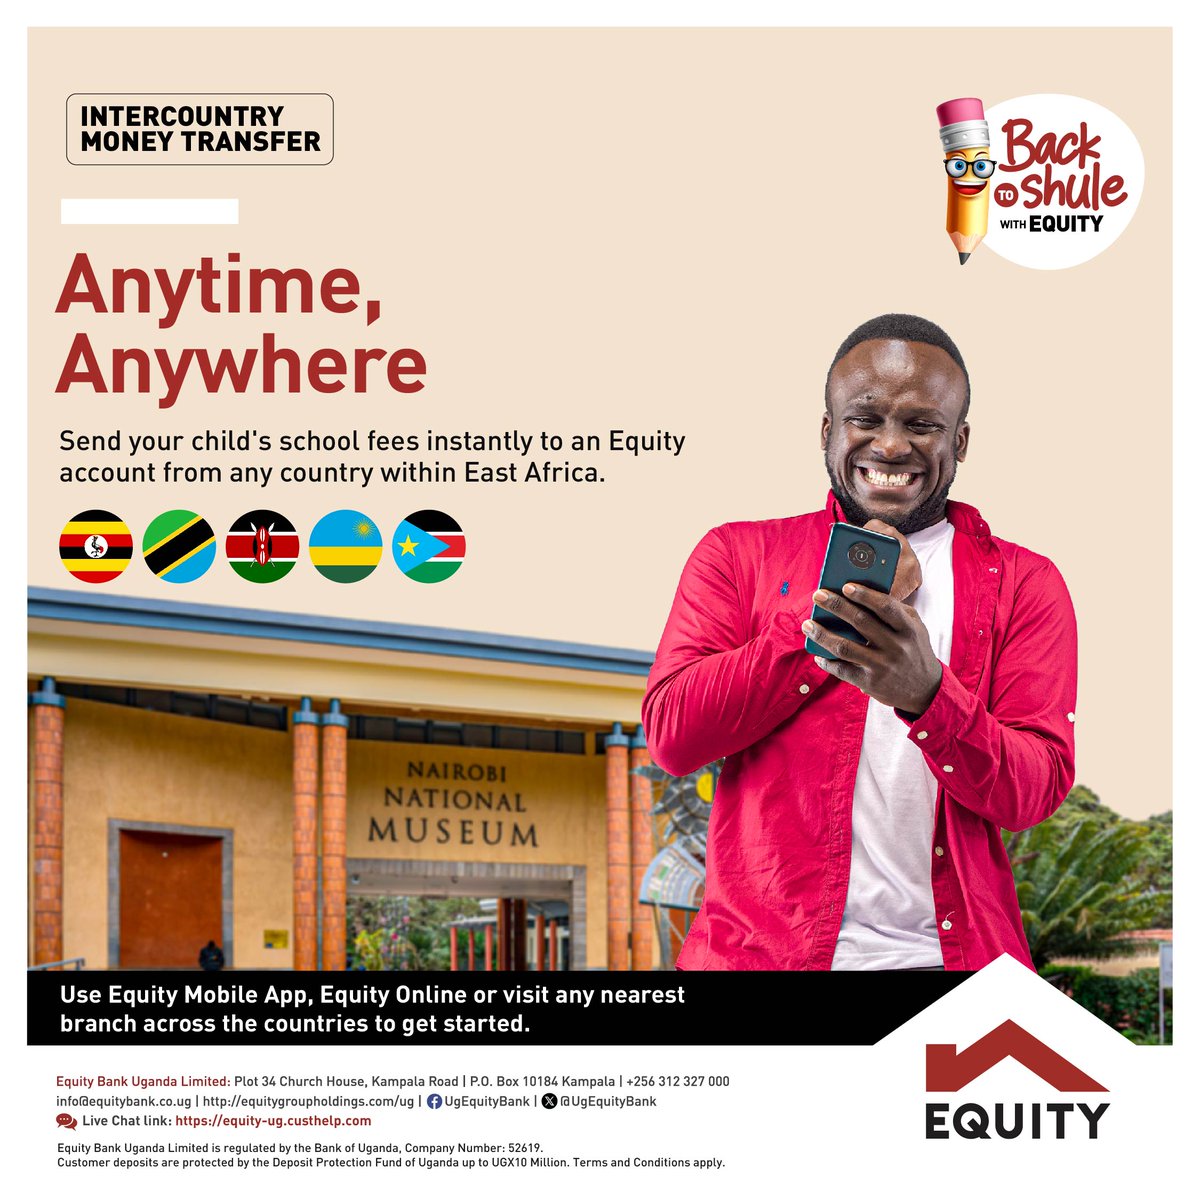 With our intercountry money transfer services, you can now send that much needed back to school money from across the East African region instantly via our online banking channels. #BackToShuleWithEquity